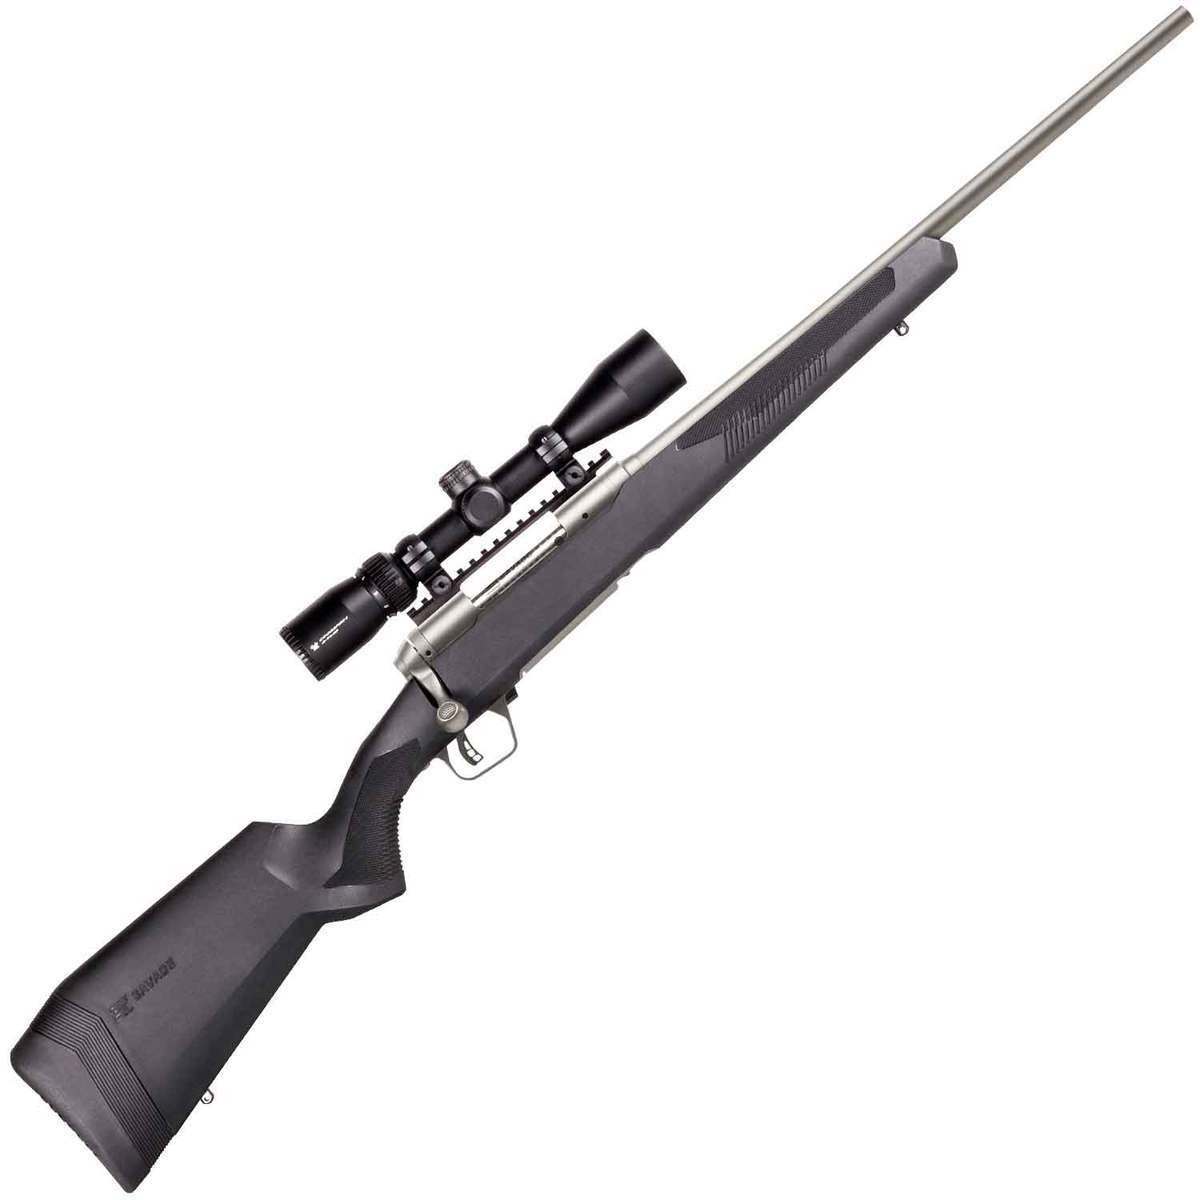 savage-arms-110-apex-storm-xp-with-vortex-crossfire-ii-scope-stainless